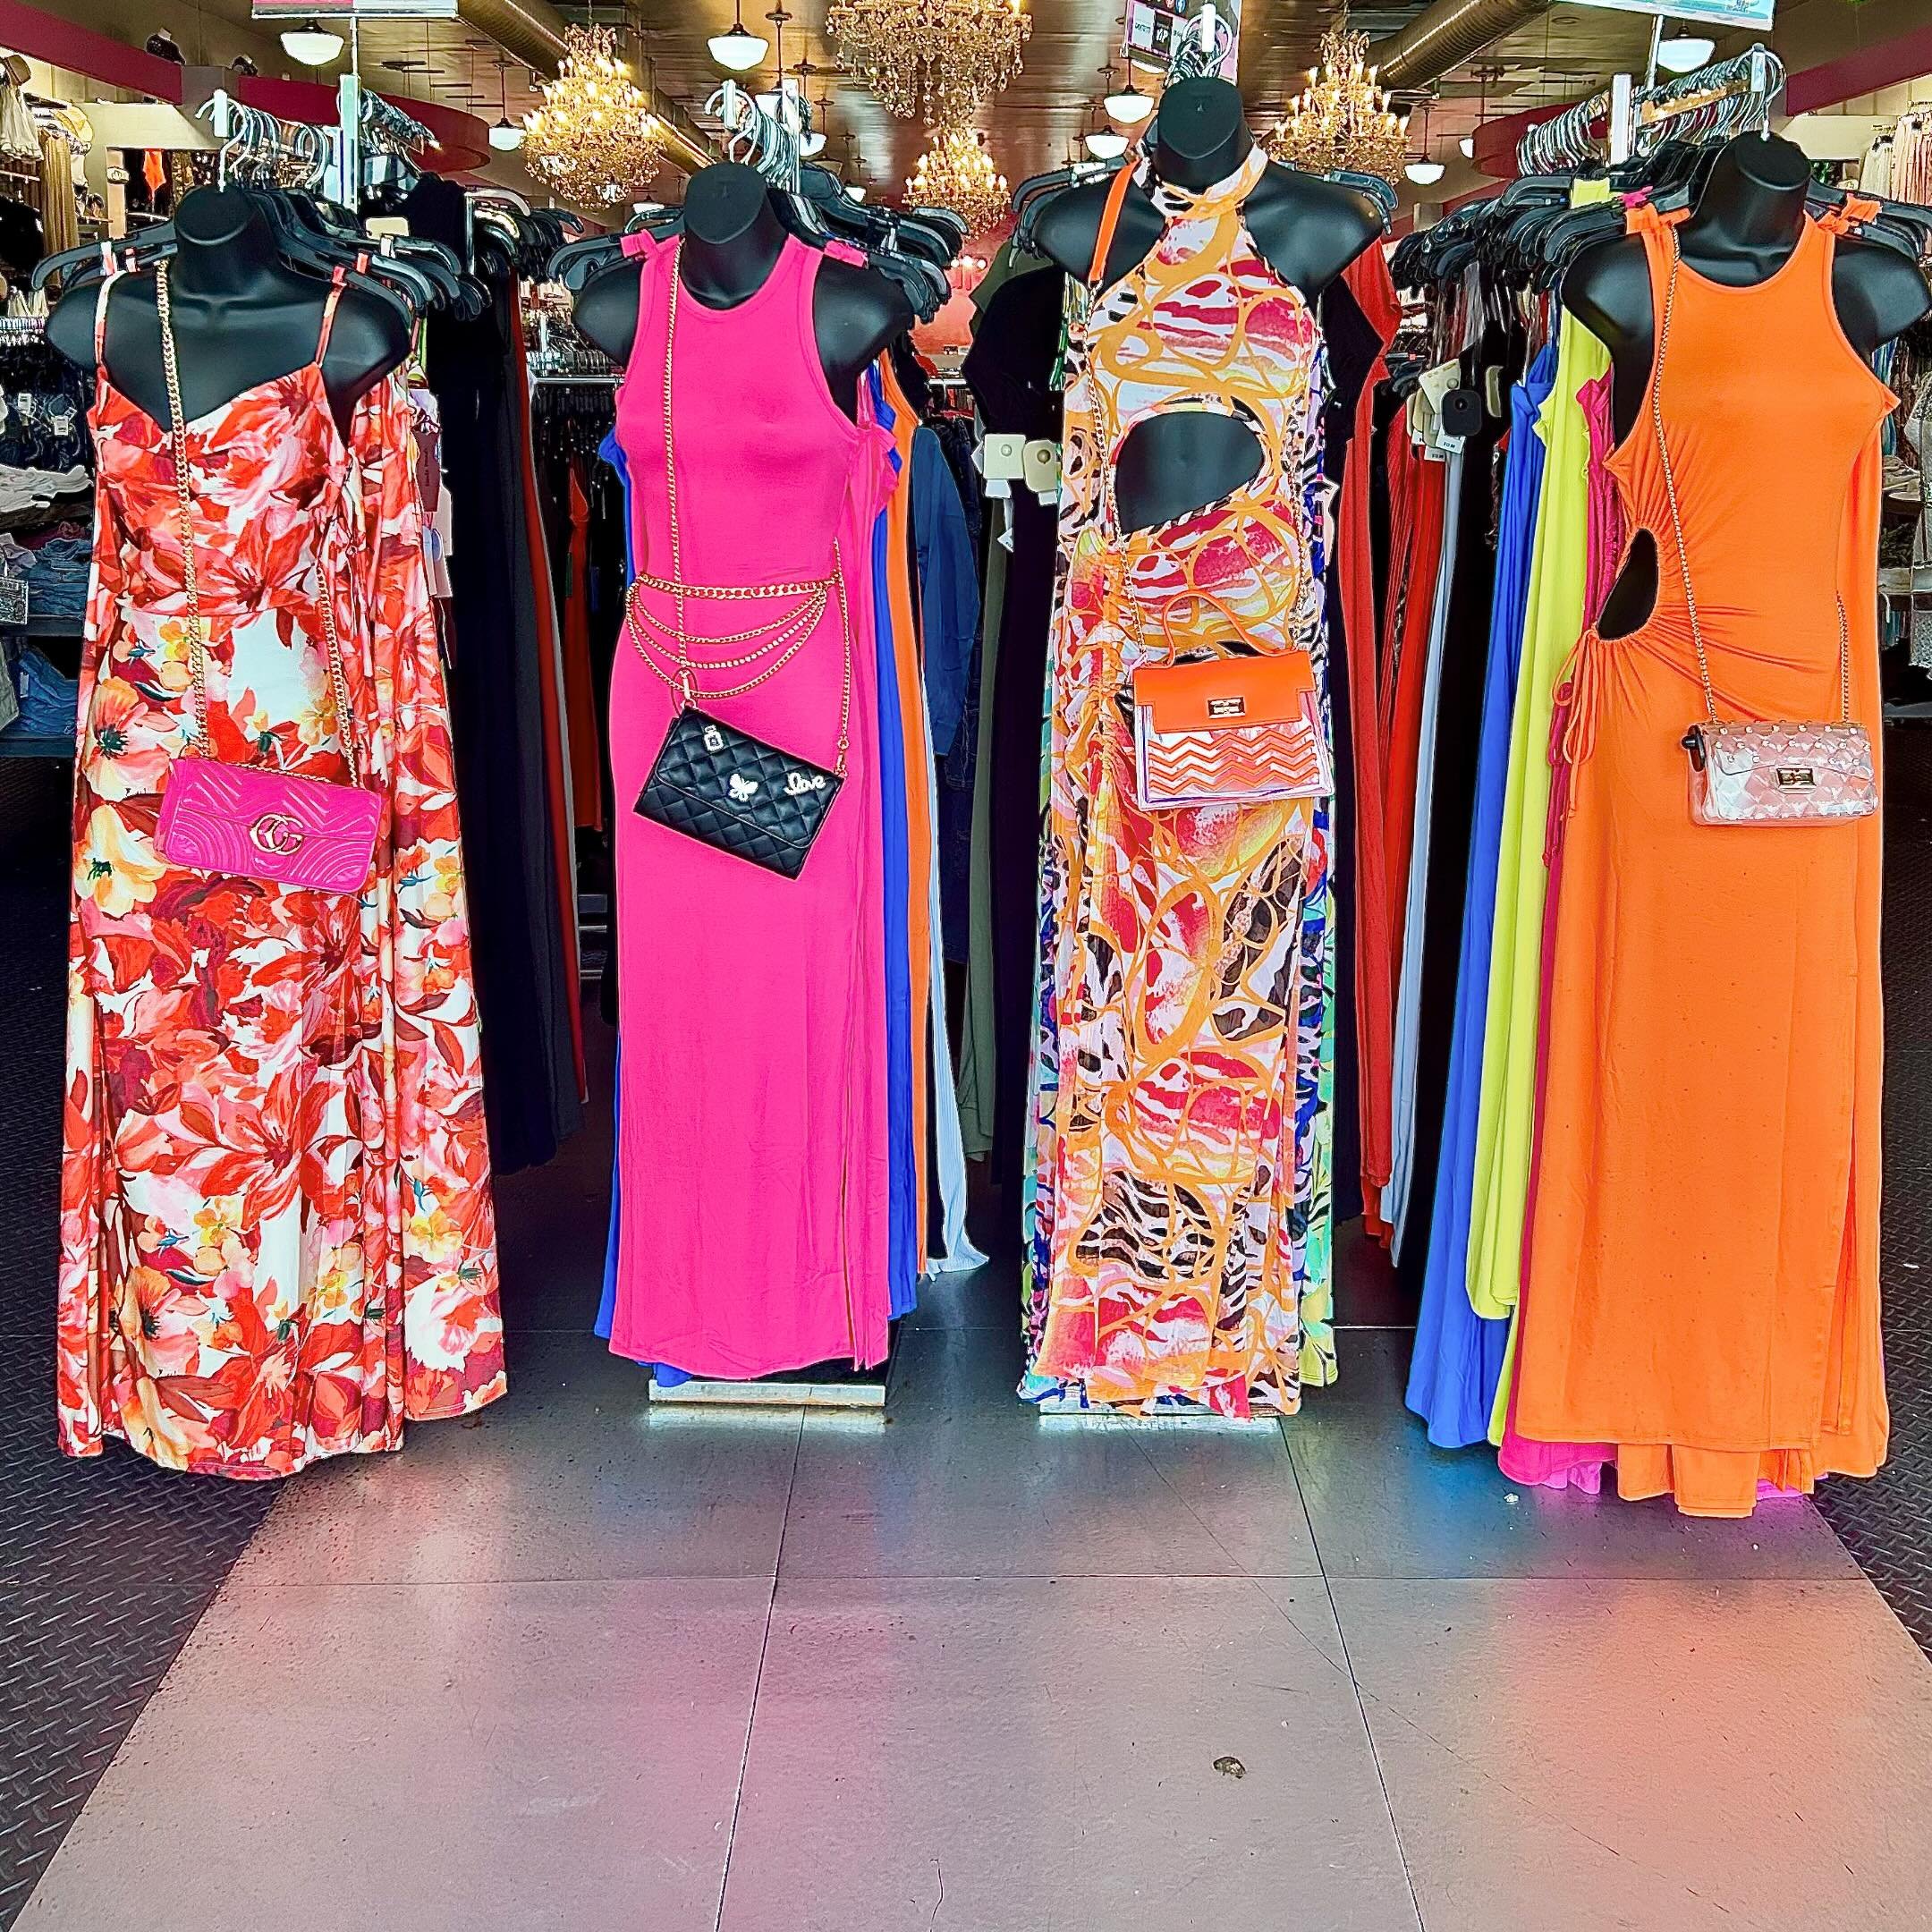 Colorful dresses that are calling your name 🌸 Come shop at Madrag for your dream spring/summer wardrobe! #madragstores 💕